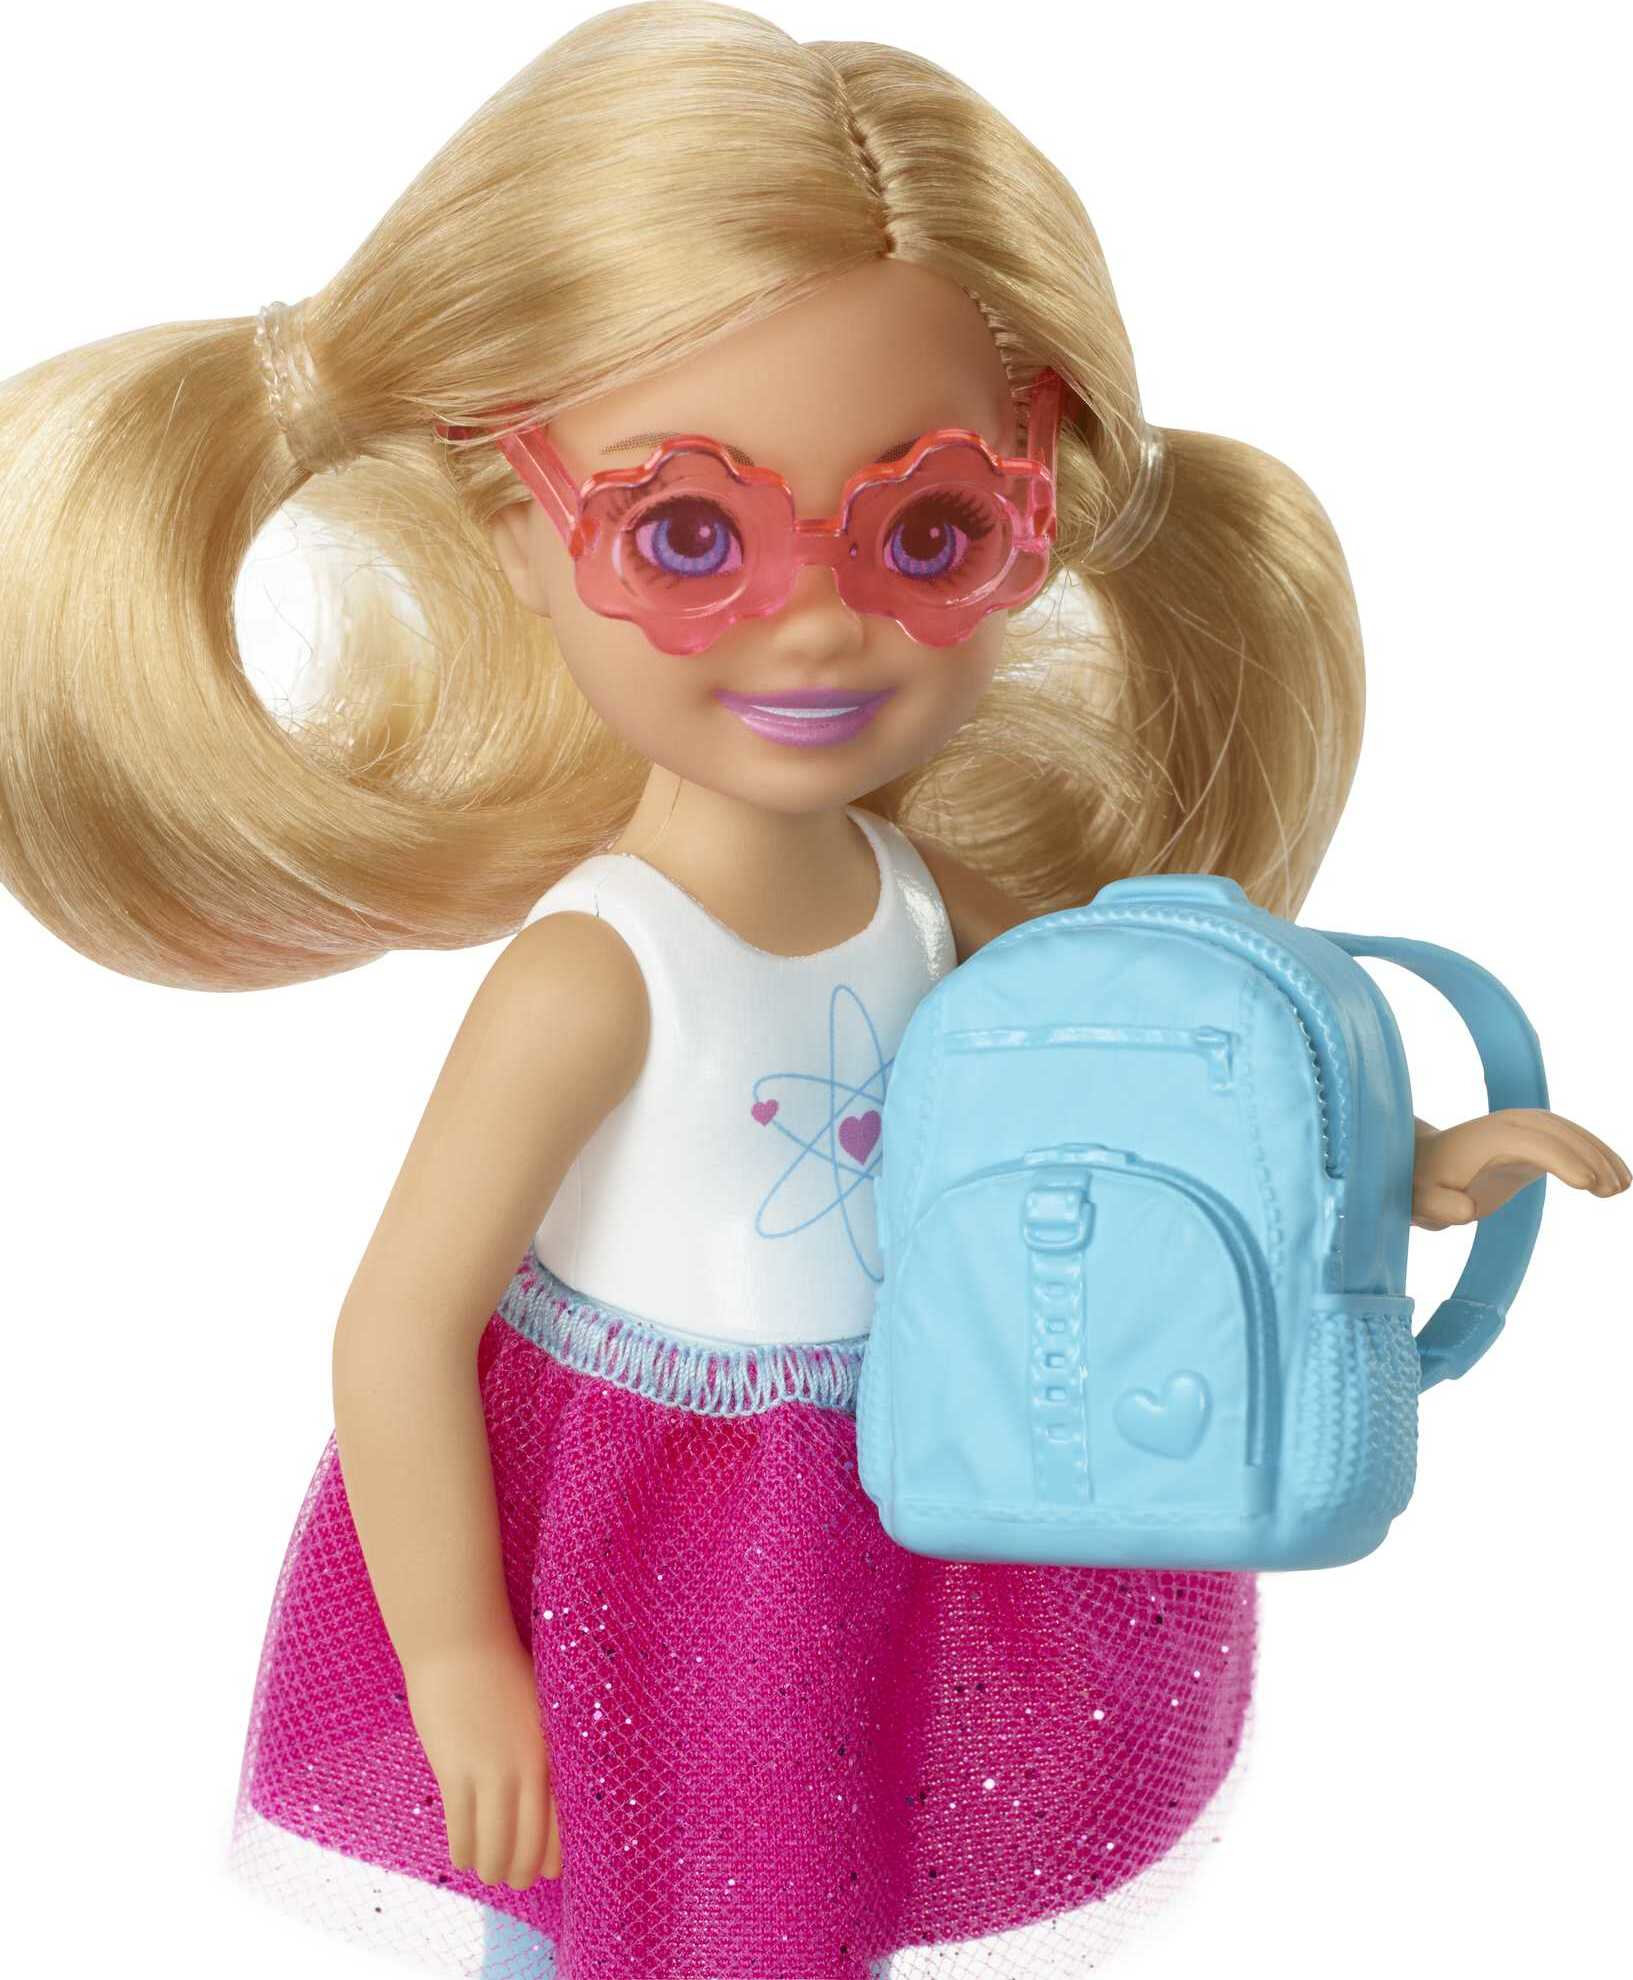 Barbie Dreamhouse Adventures Chelsea Doll & Accessories, Travel Set with Puppy, Blonde Small Doll - image 4 of 6